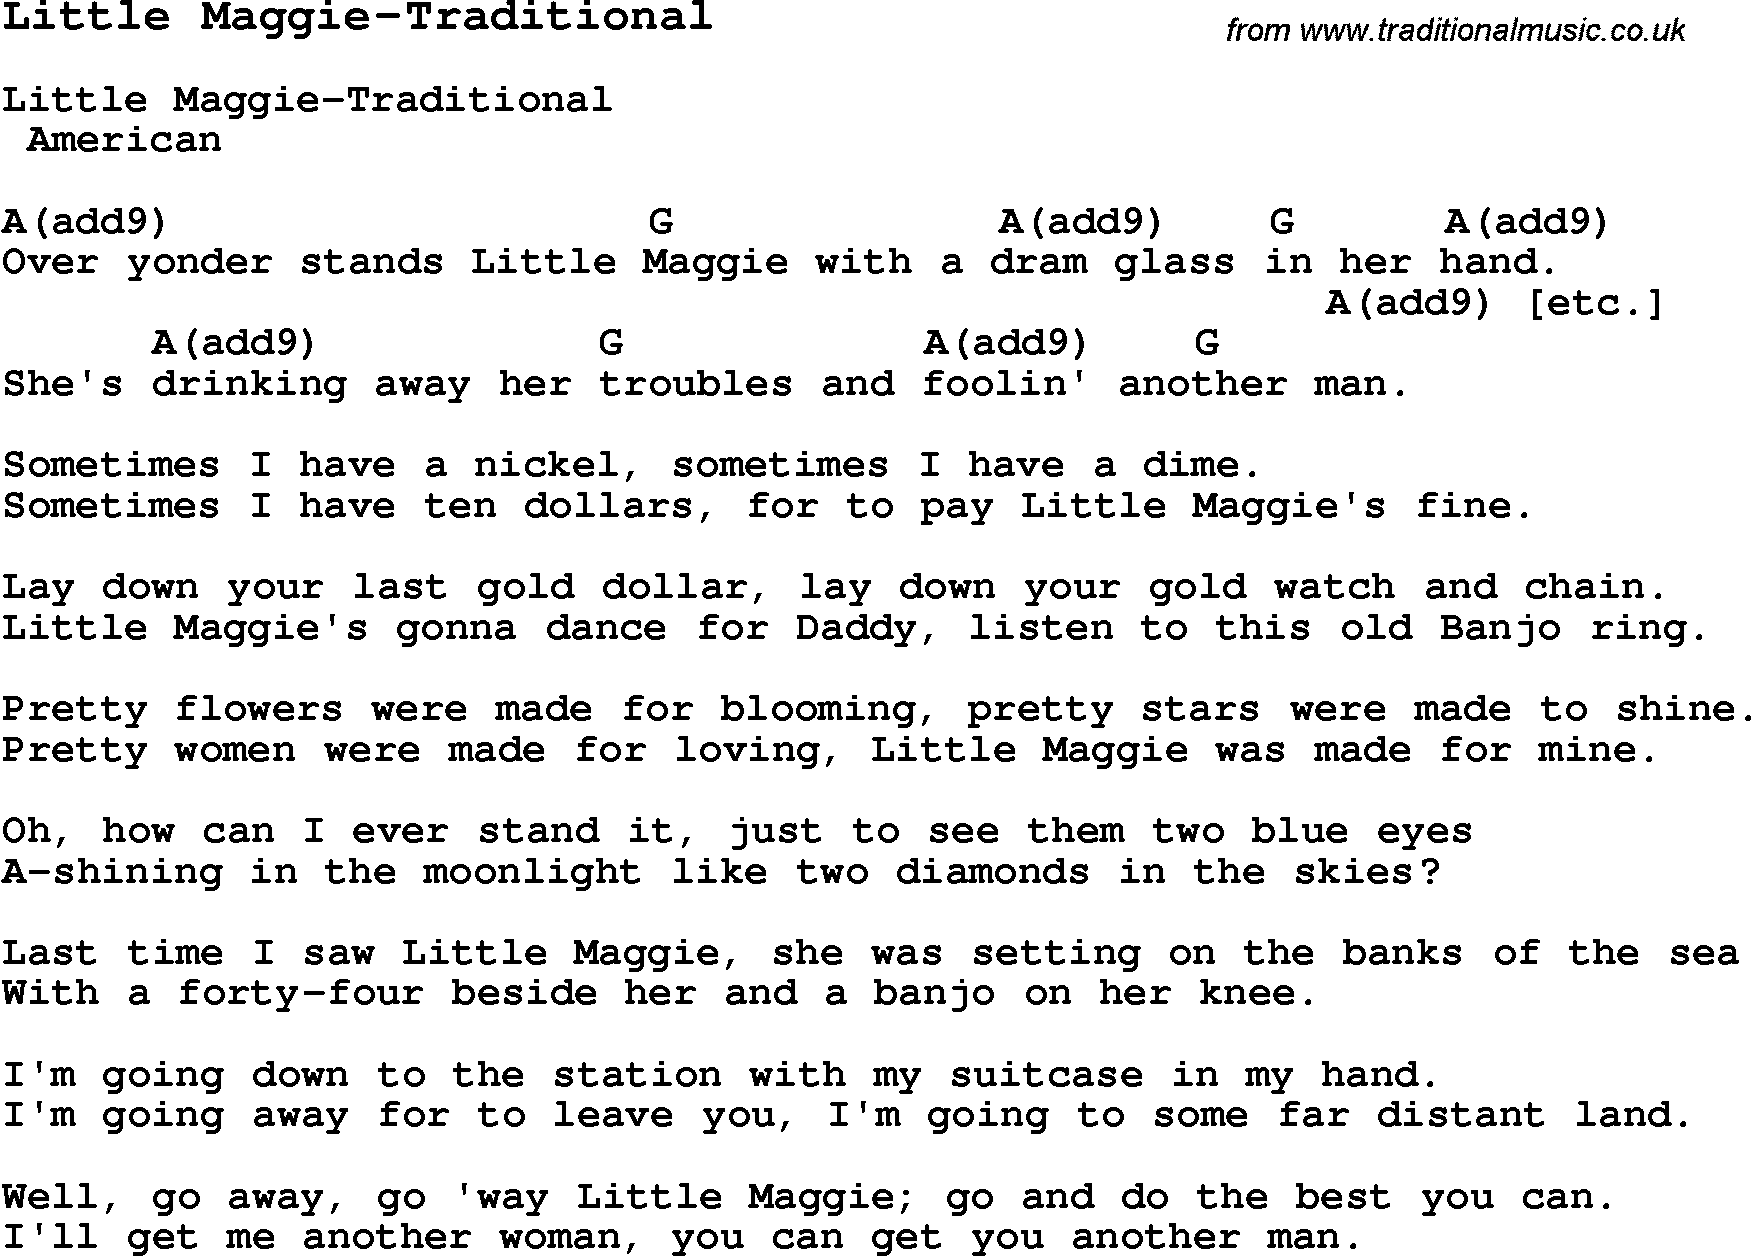 Summer-Camp Song, Little Maggie-Traditional, with lyrics and chords for Ukulele, Guitar Banjo etc.